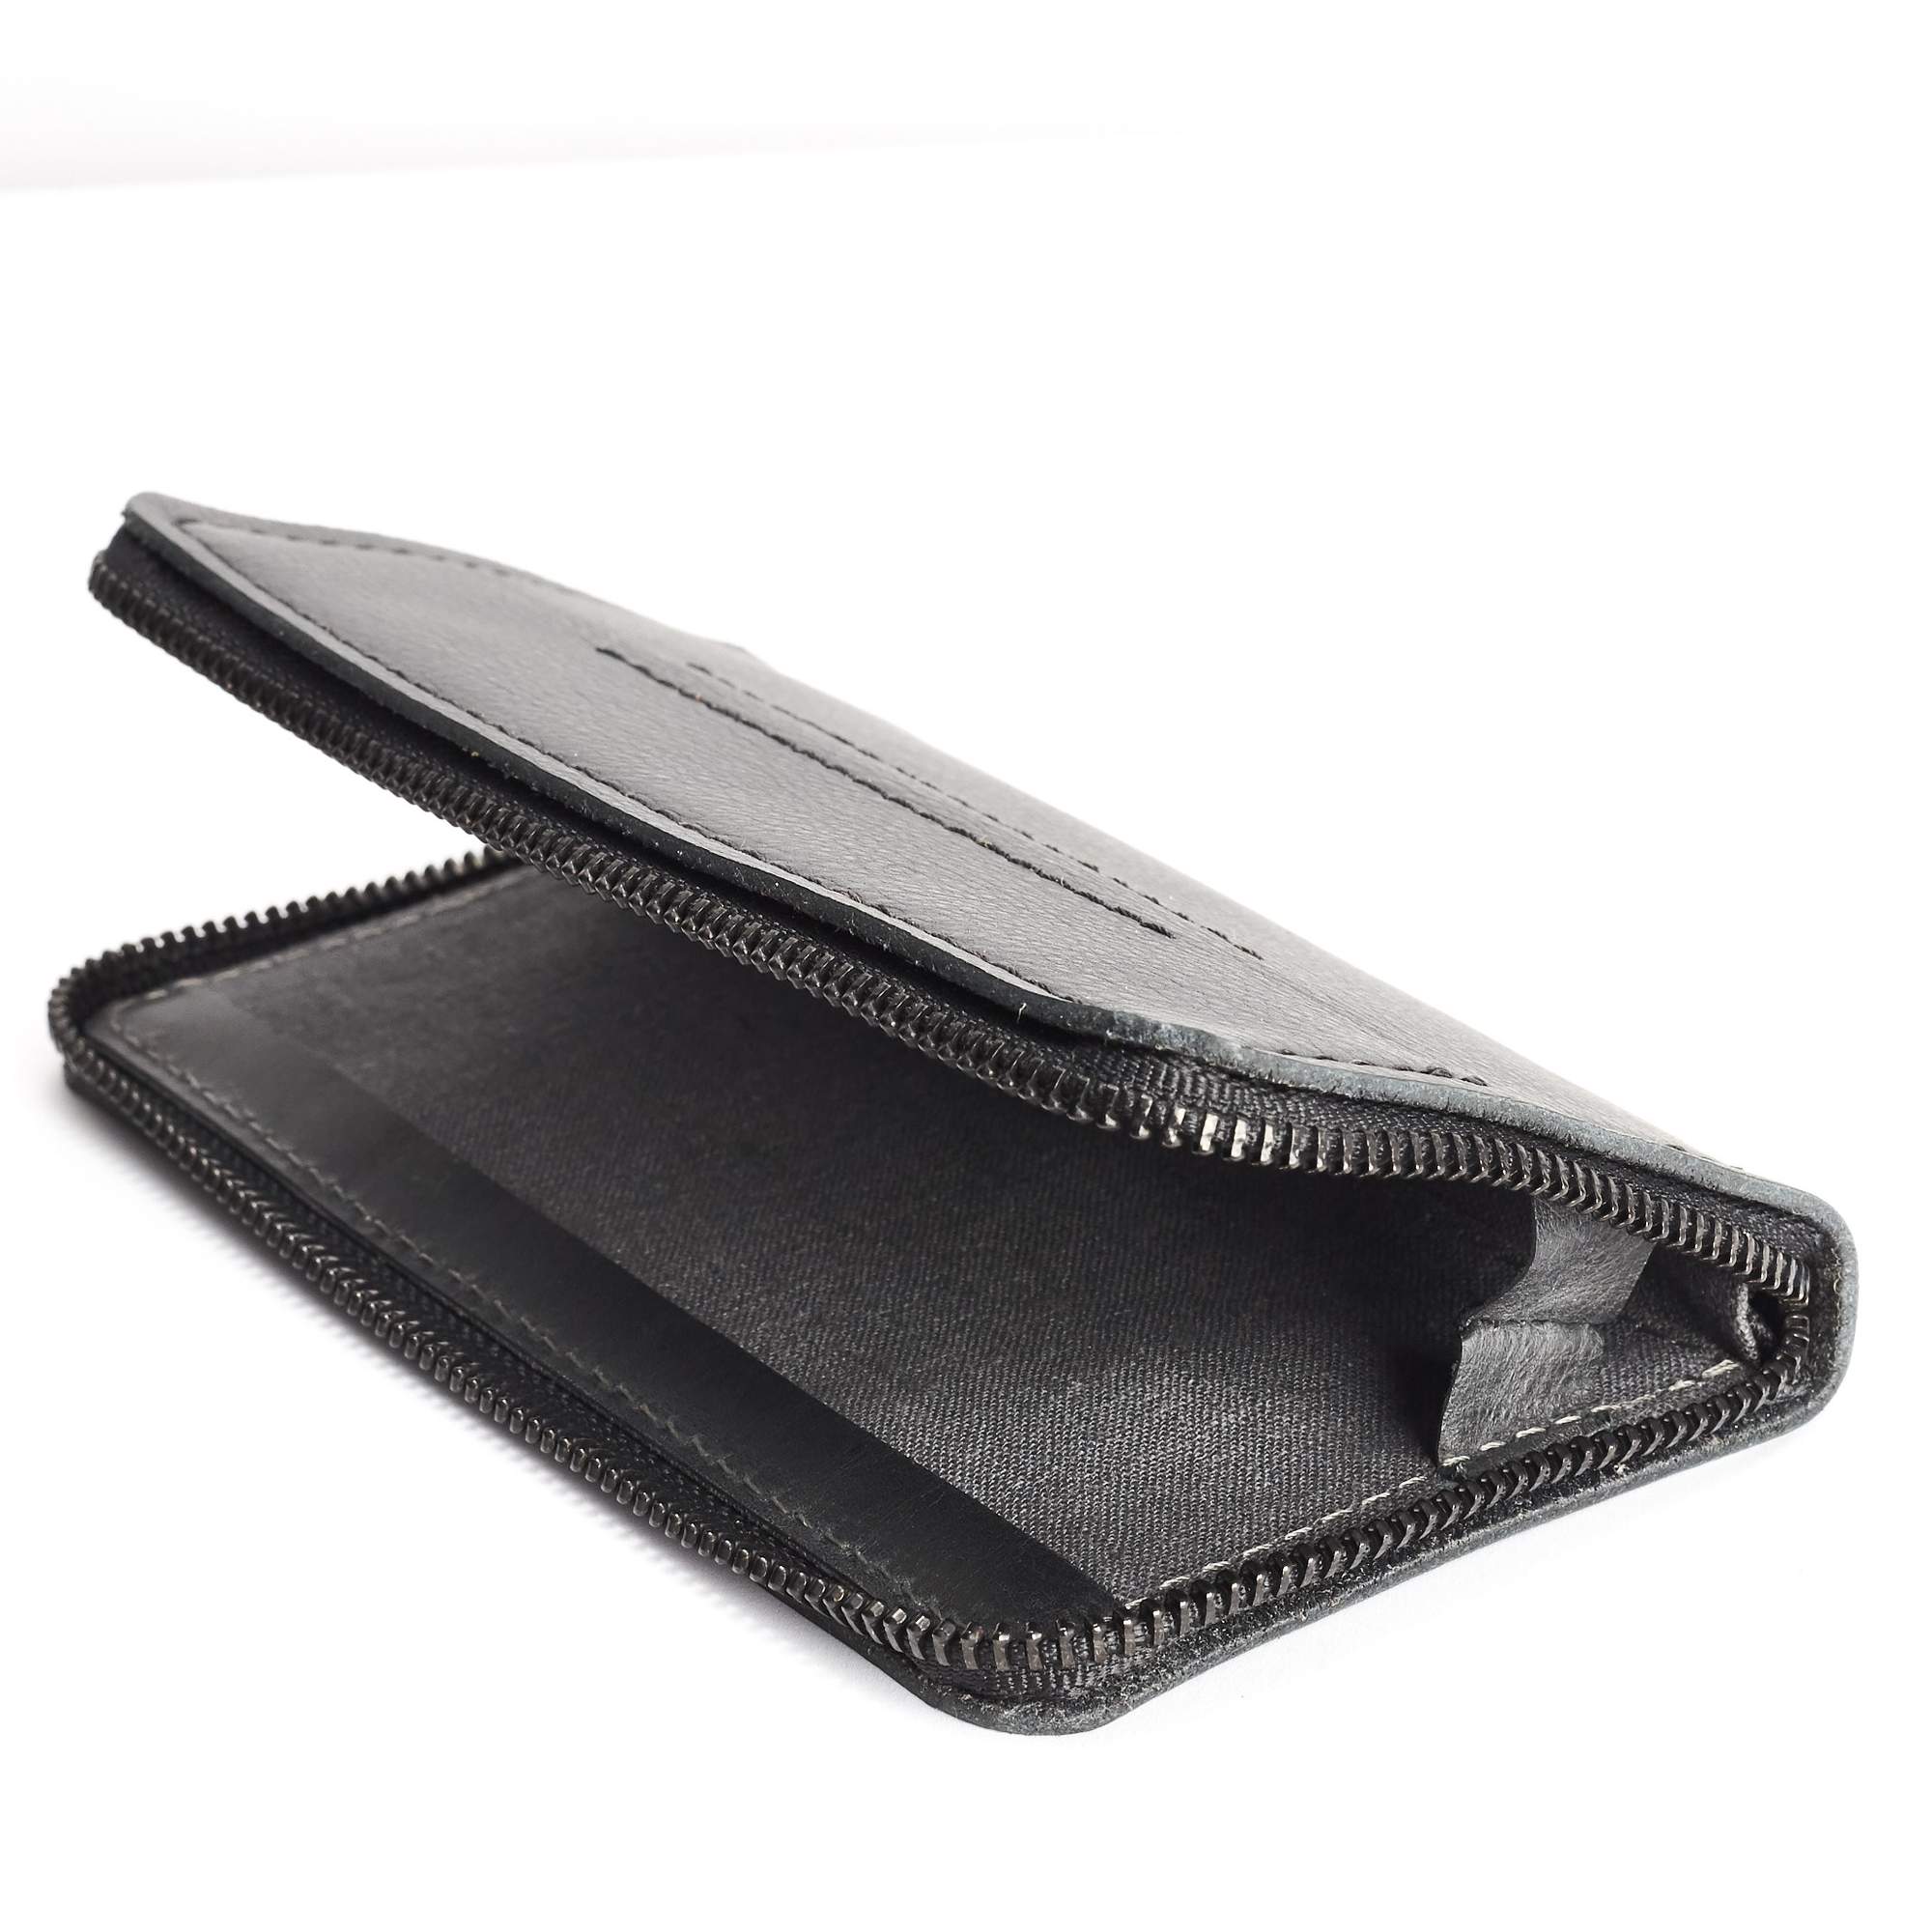 Linen interior. Black handcrafted leather stand case for the Samsung Galaxy S8 and S8 Plus. Samsung sleeve wallet with card holder